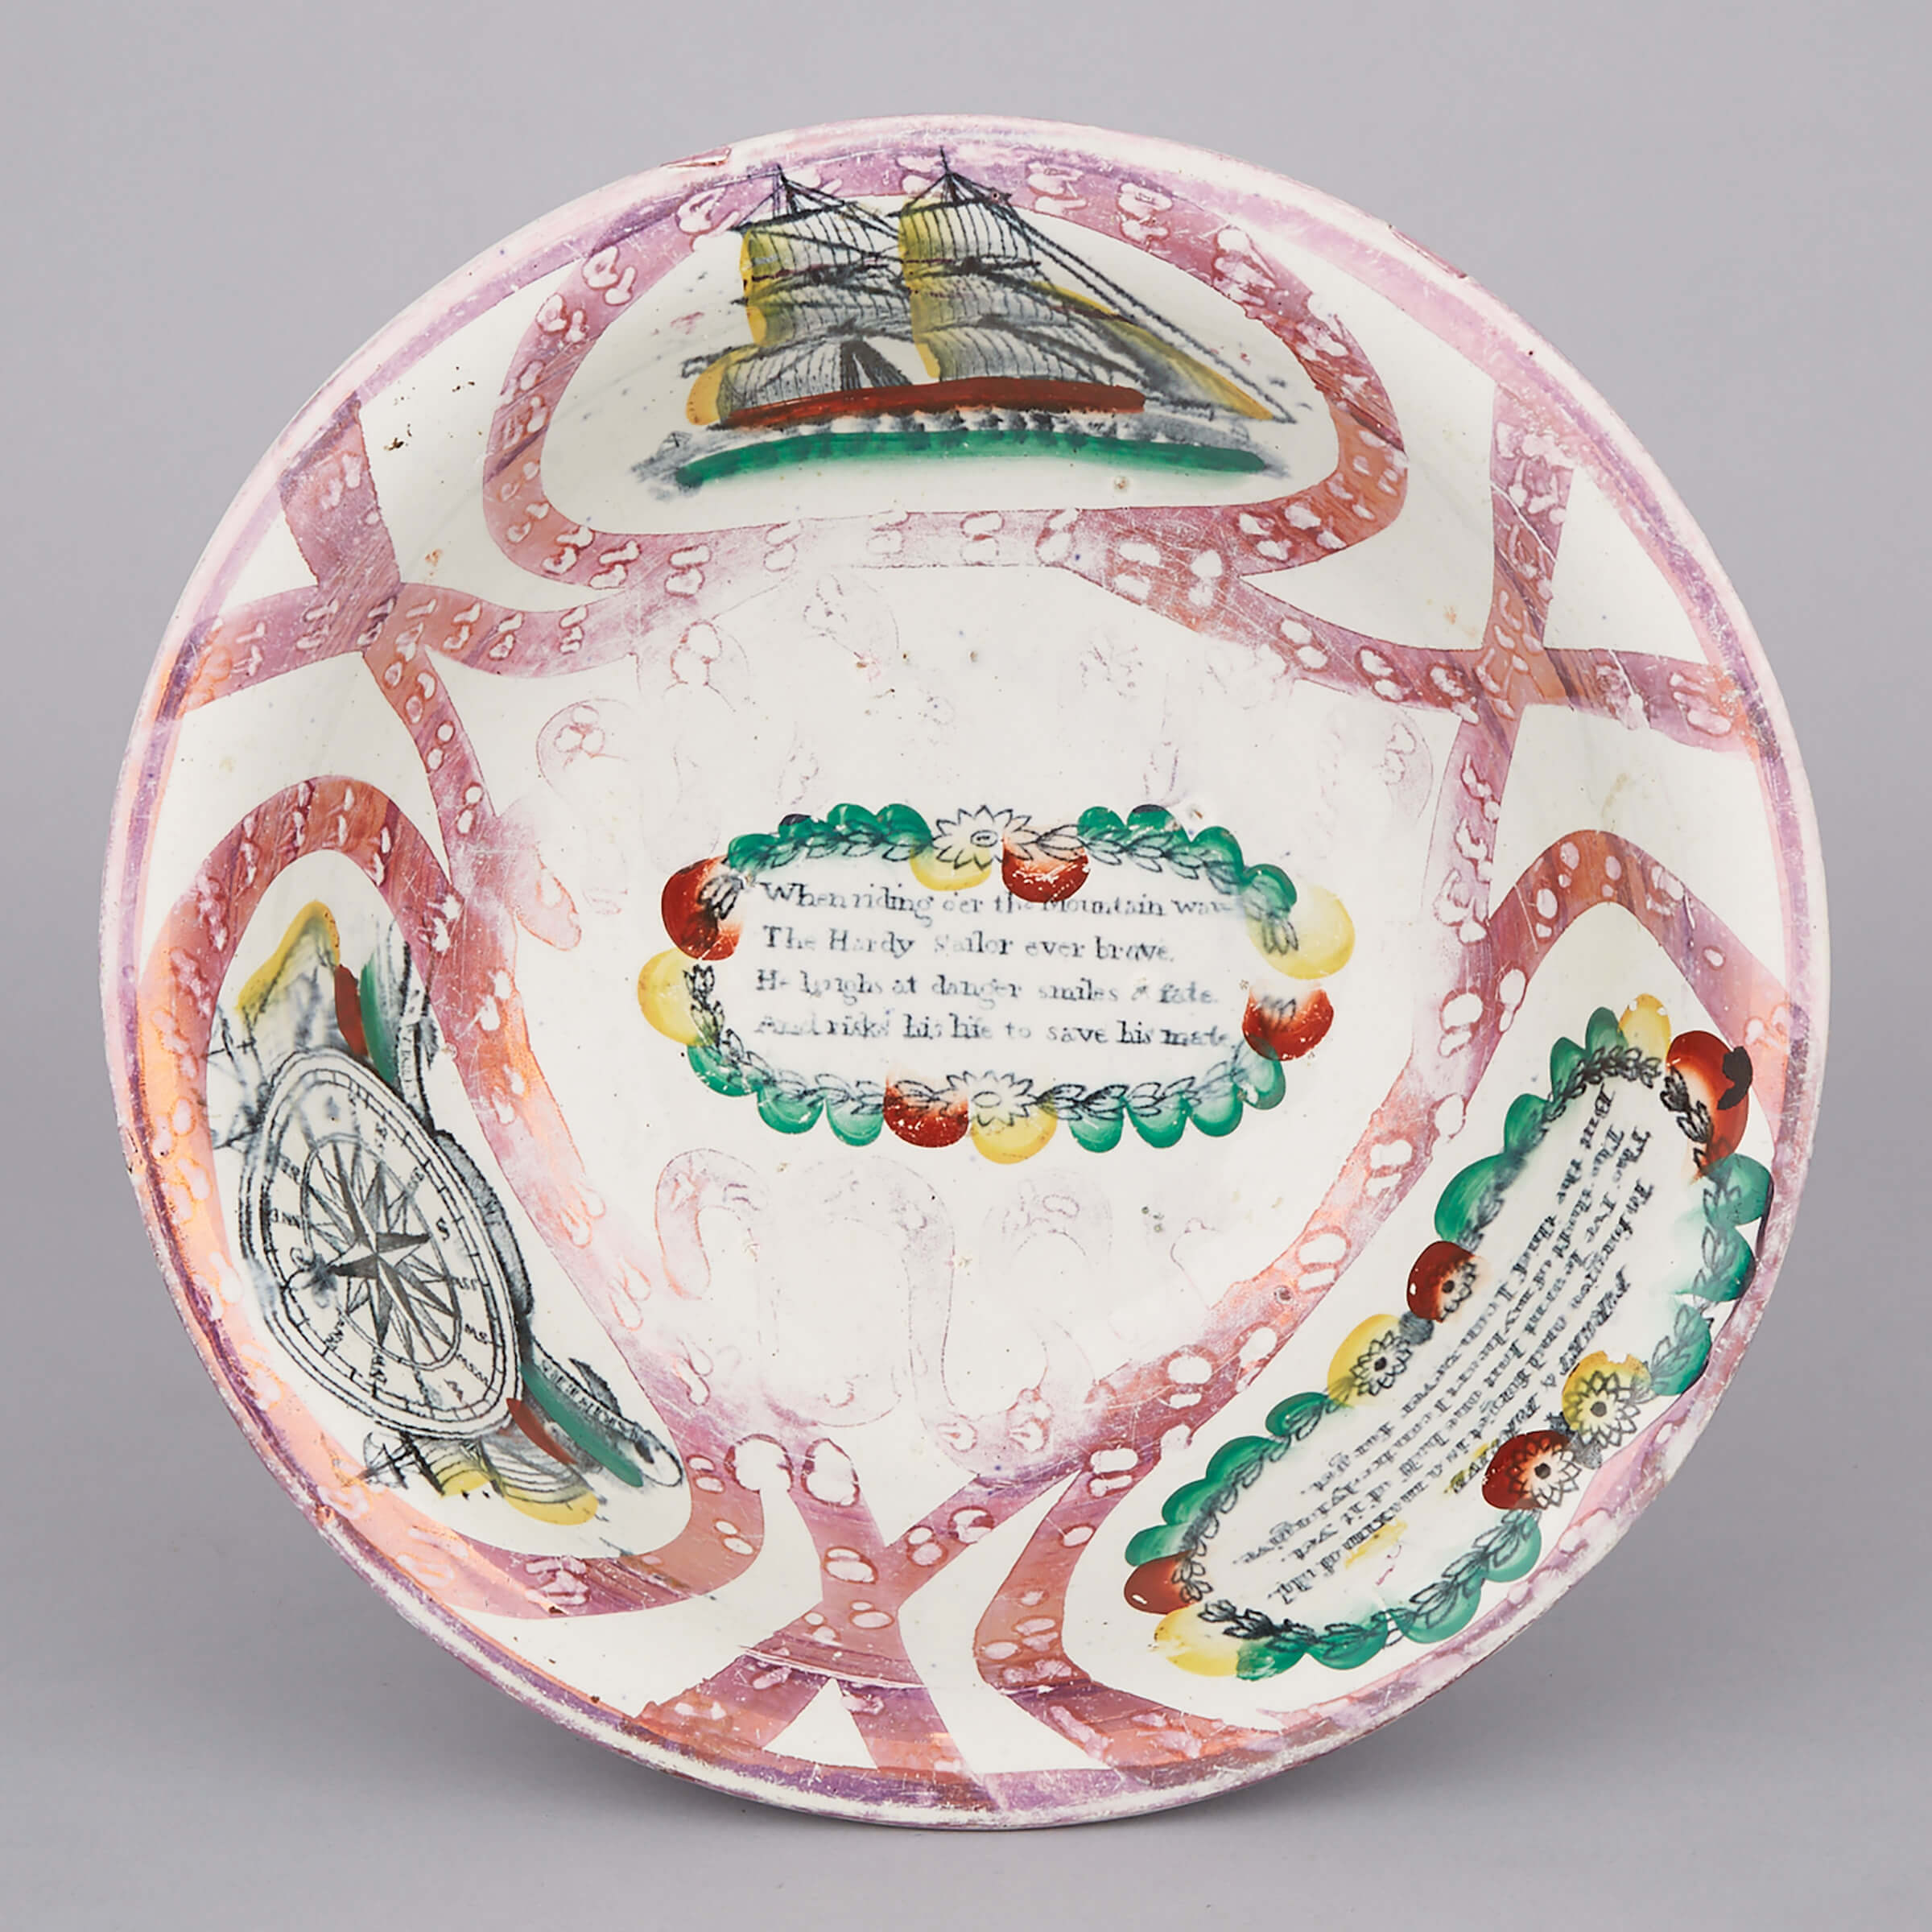 Sunderland Pink Lustre Decorated Bowl, possibly Middlesbrough, mid-19th century